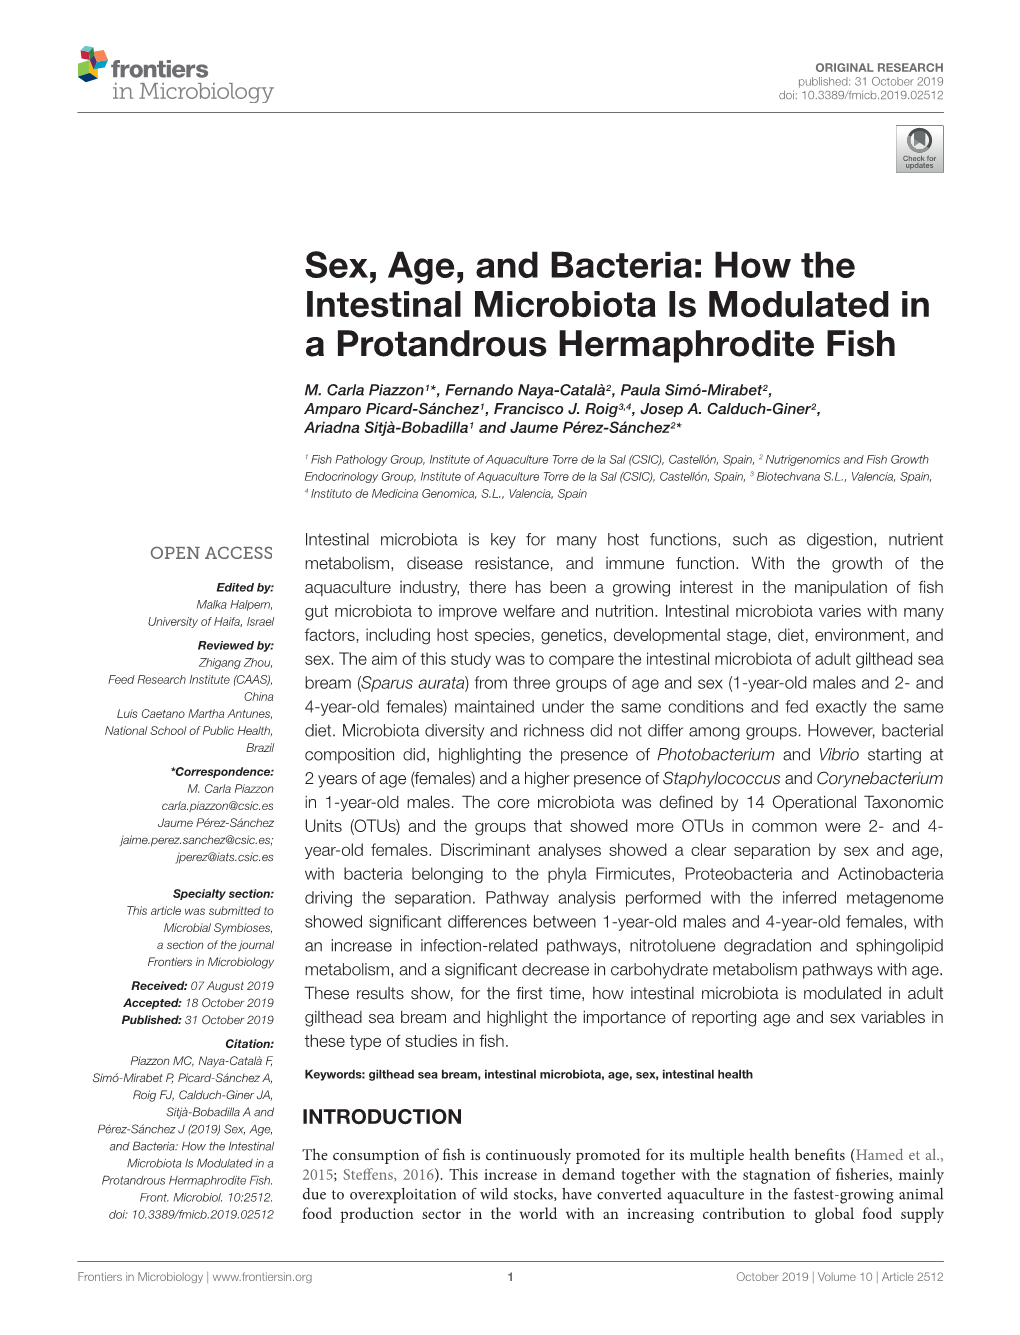 Sex, Age, and Bacteria: How the Intestinal Microbiota Is Modulated in a Protandrous Hermaphrodite Fish